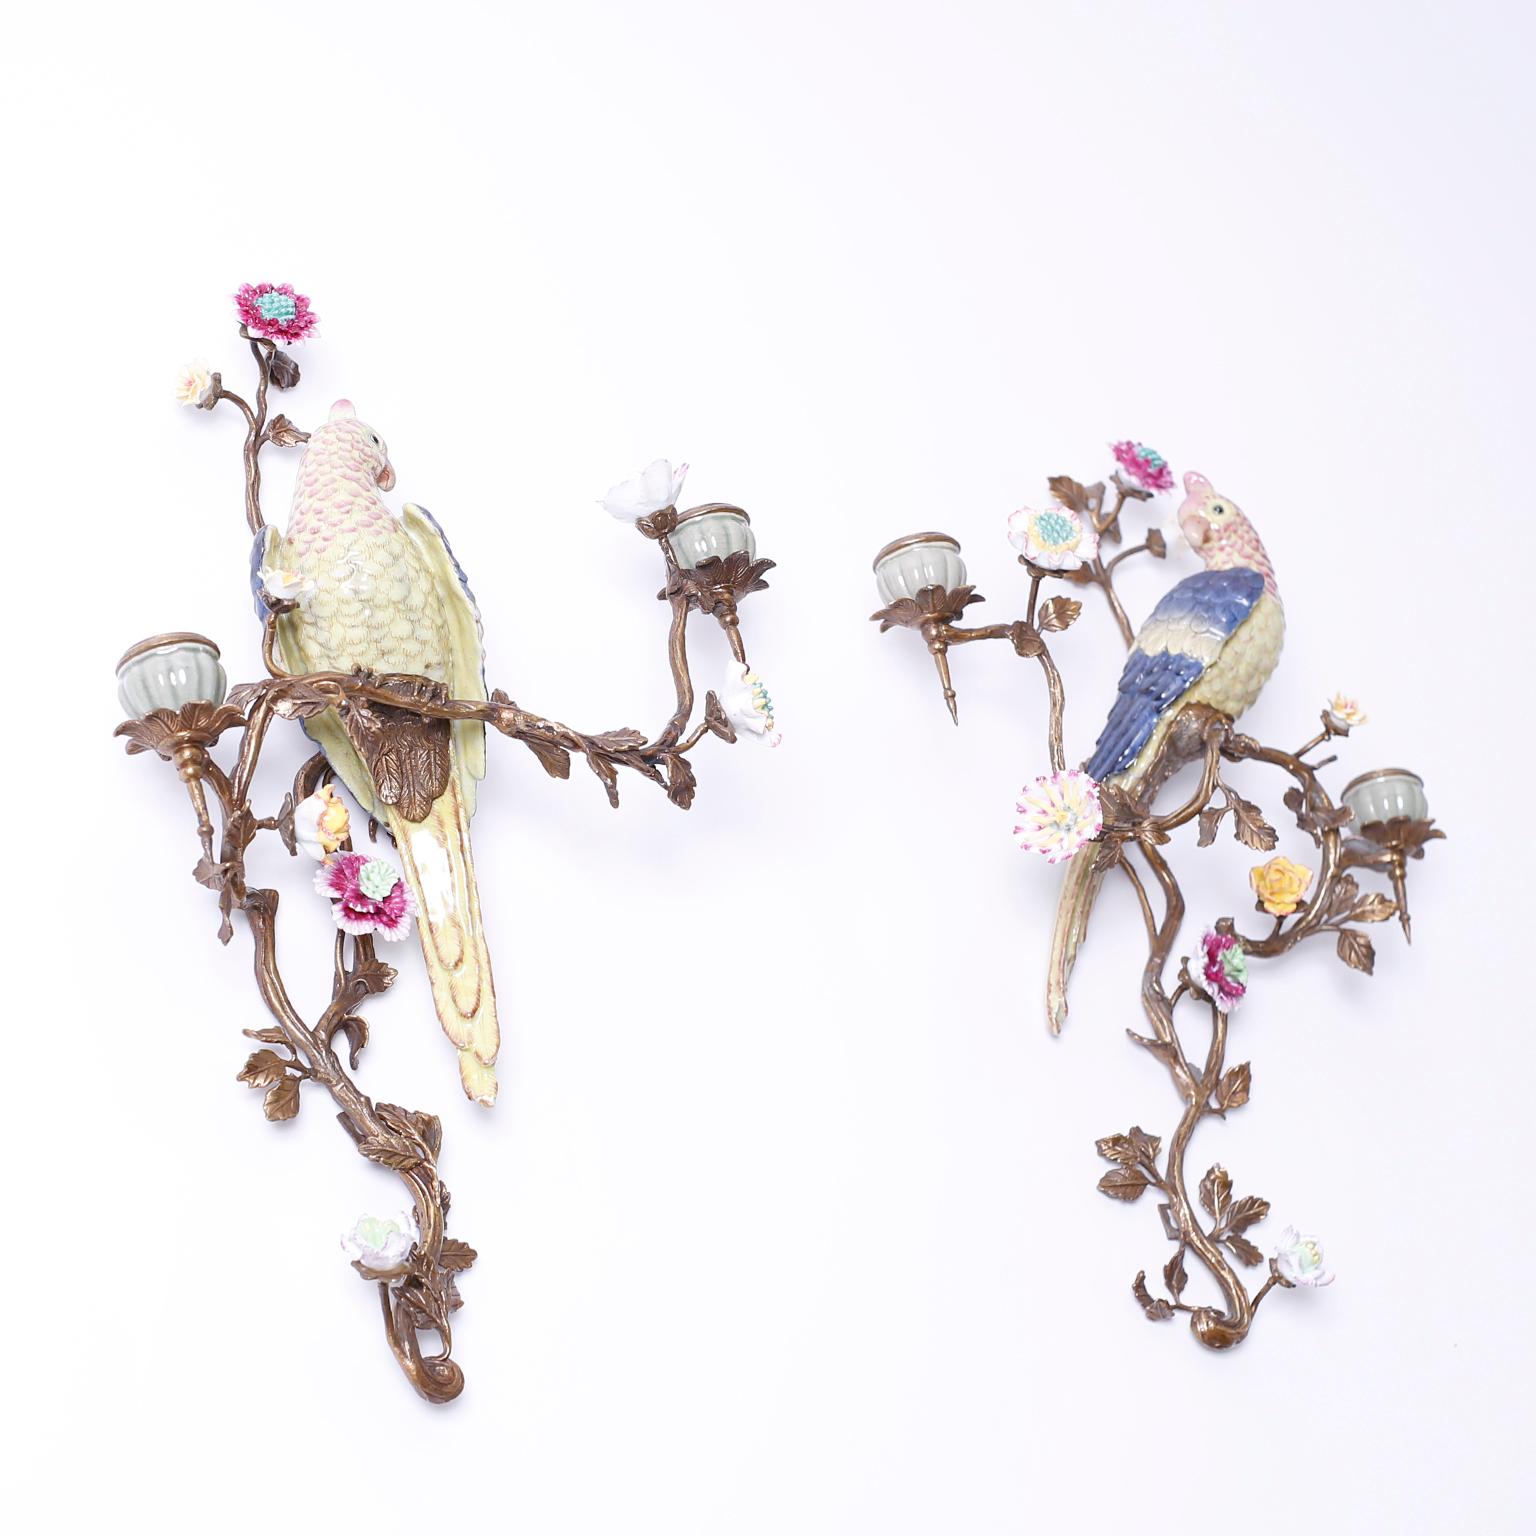 Pair of vintage wall sconces with colorful porcelain parrots, flowers, and candleholders supported by brass branches with leaves.